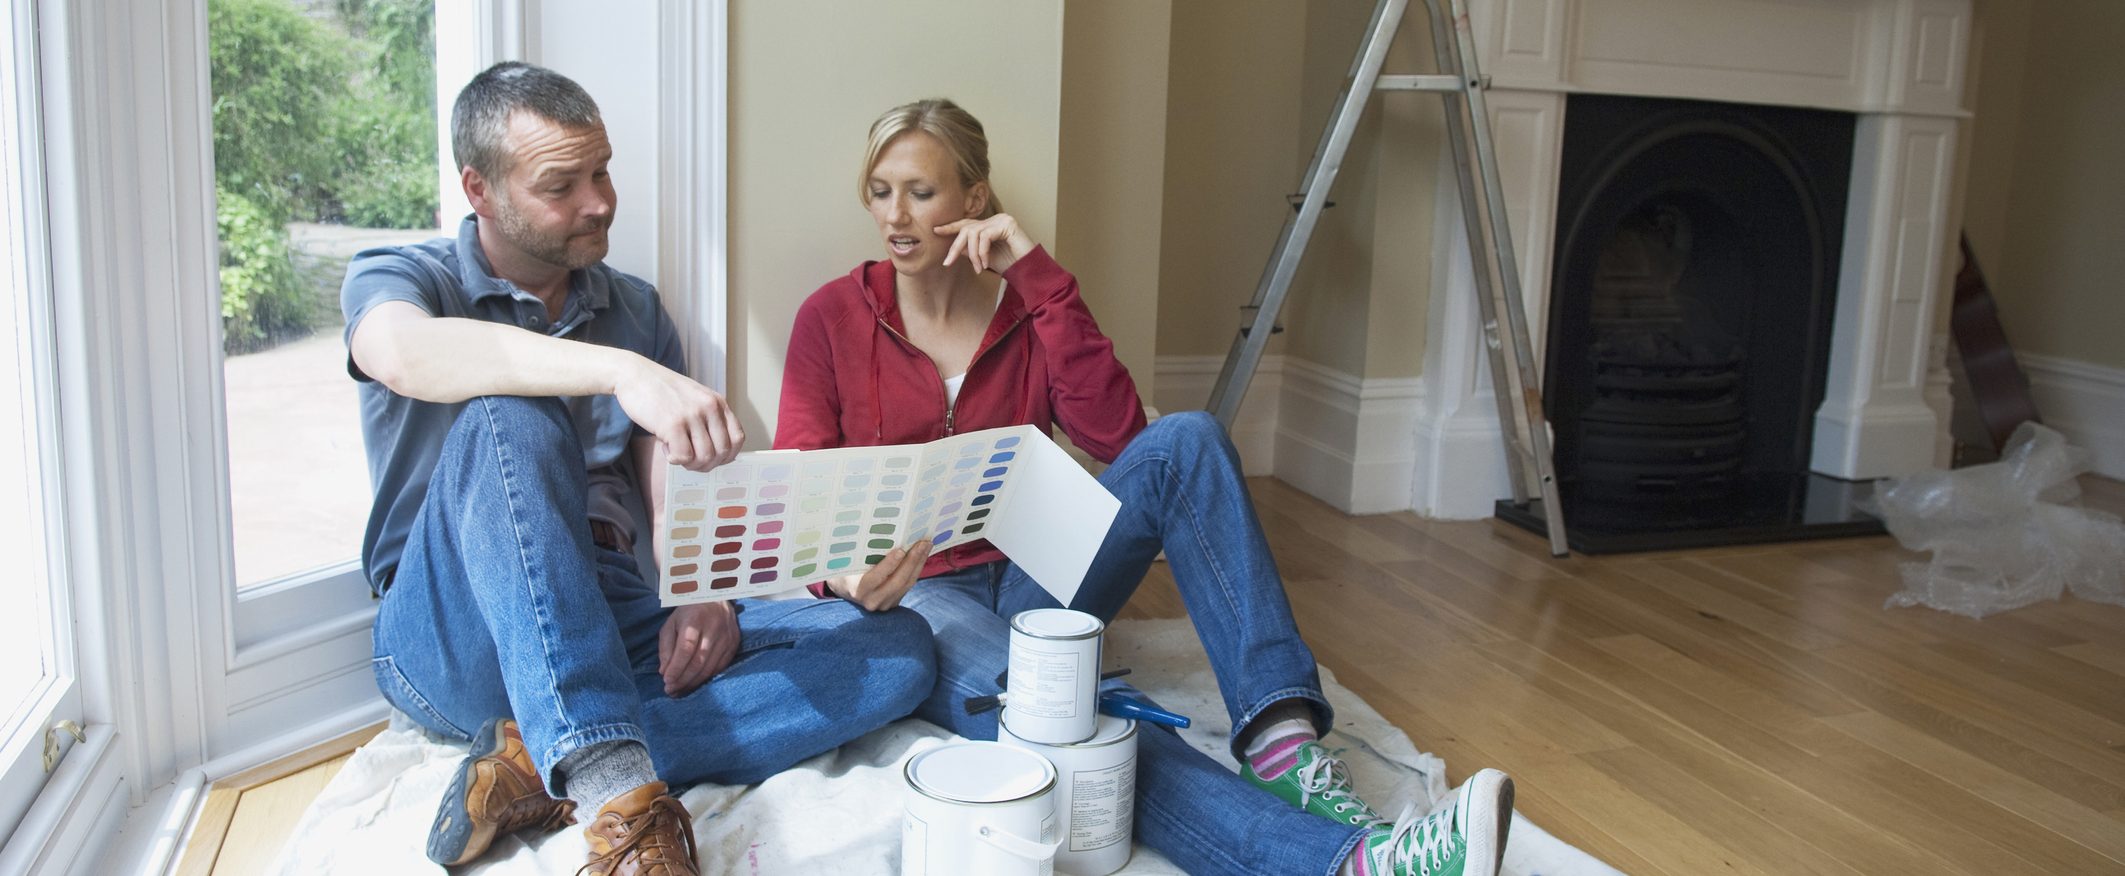 An image of a couple sitting on the floor of a room under renovations looking at brochures of different paint colors.